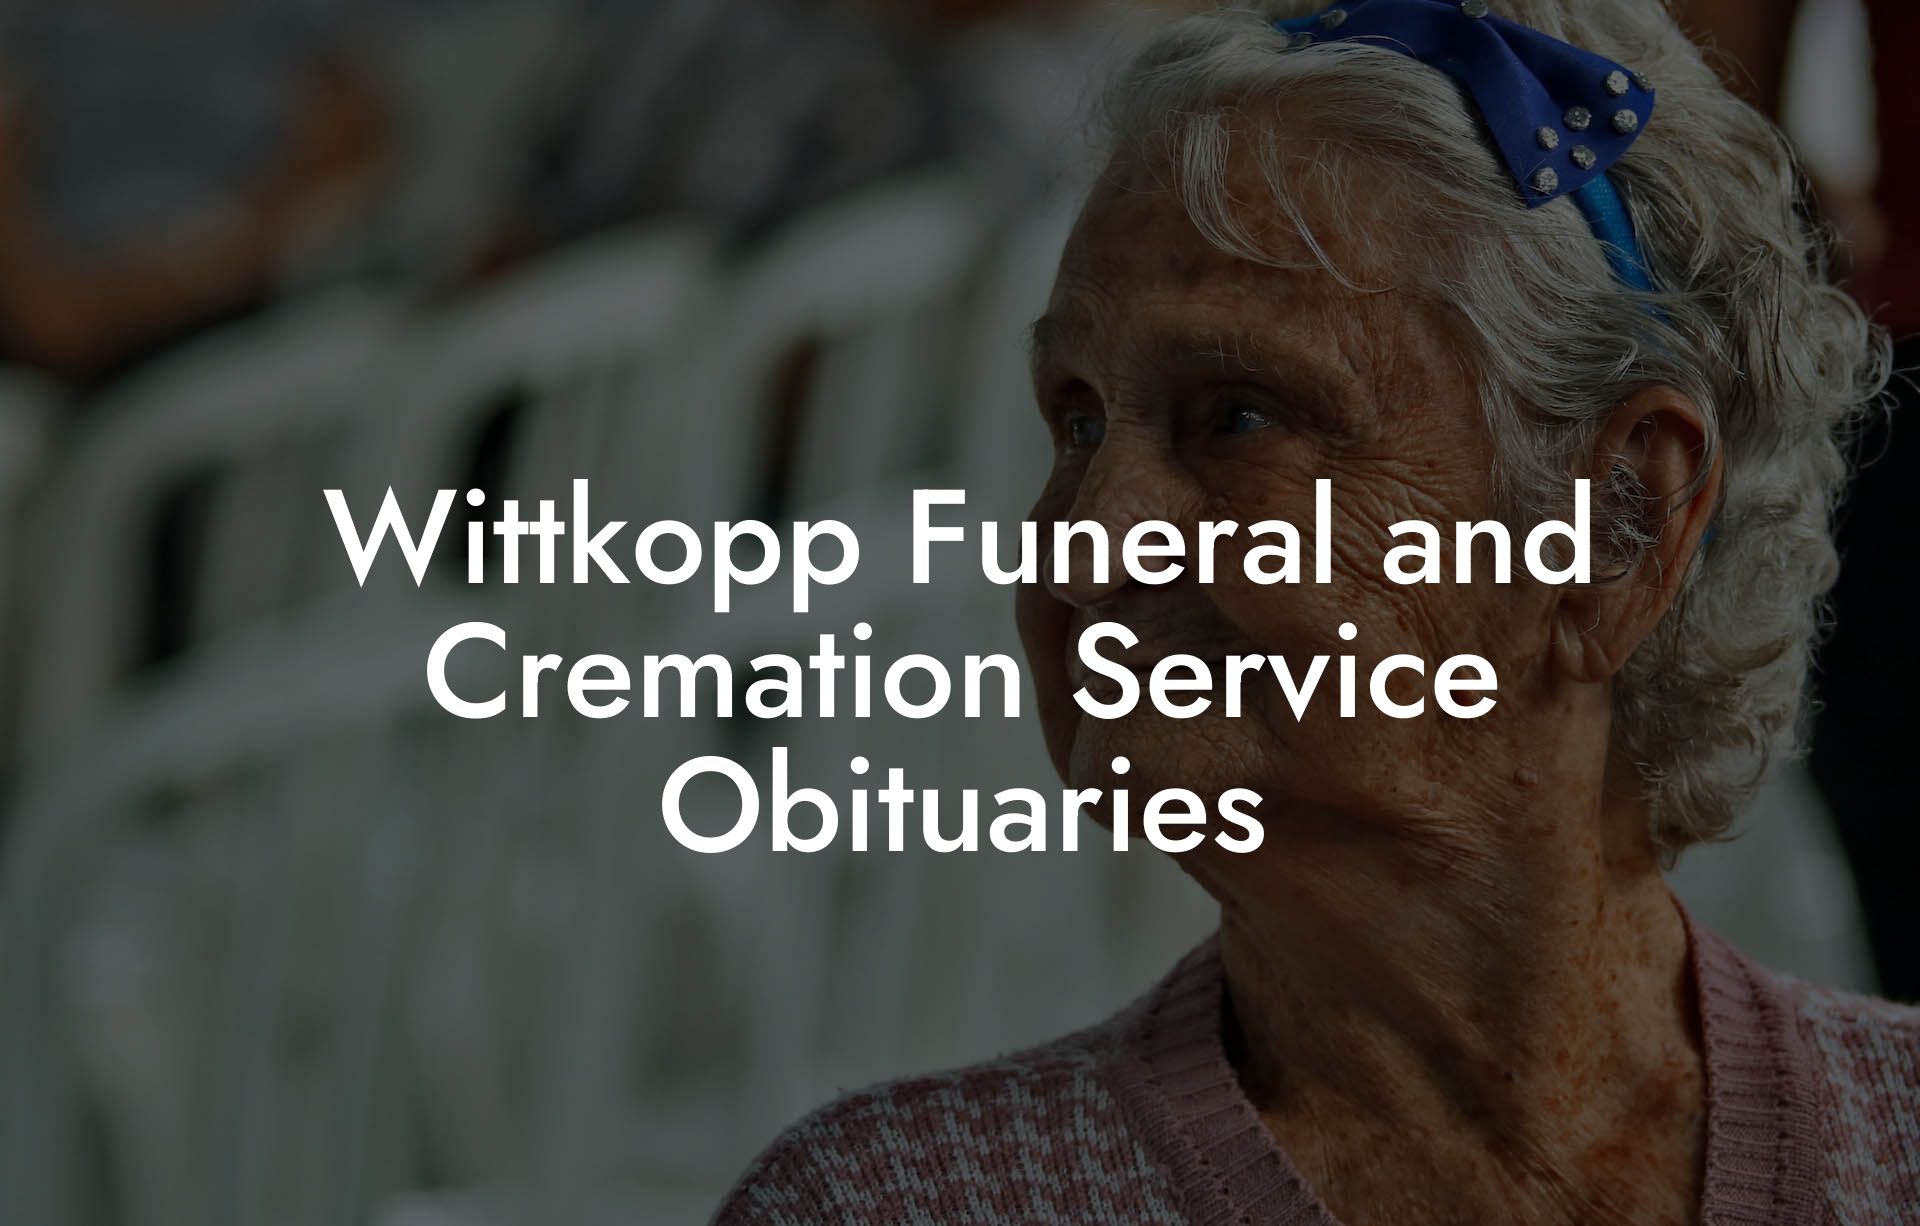 Wittkopp Funeral and Cremation Service Obituaries